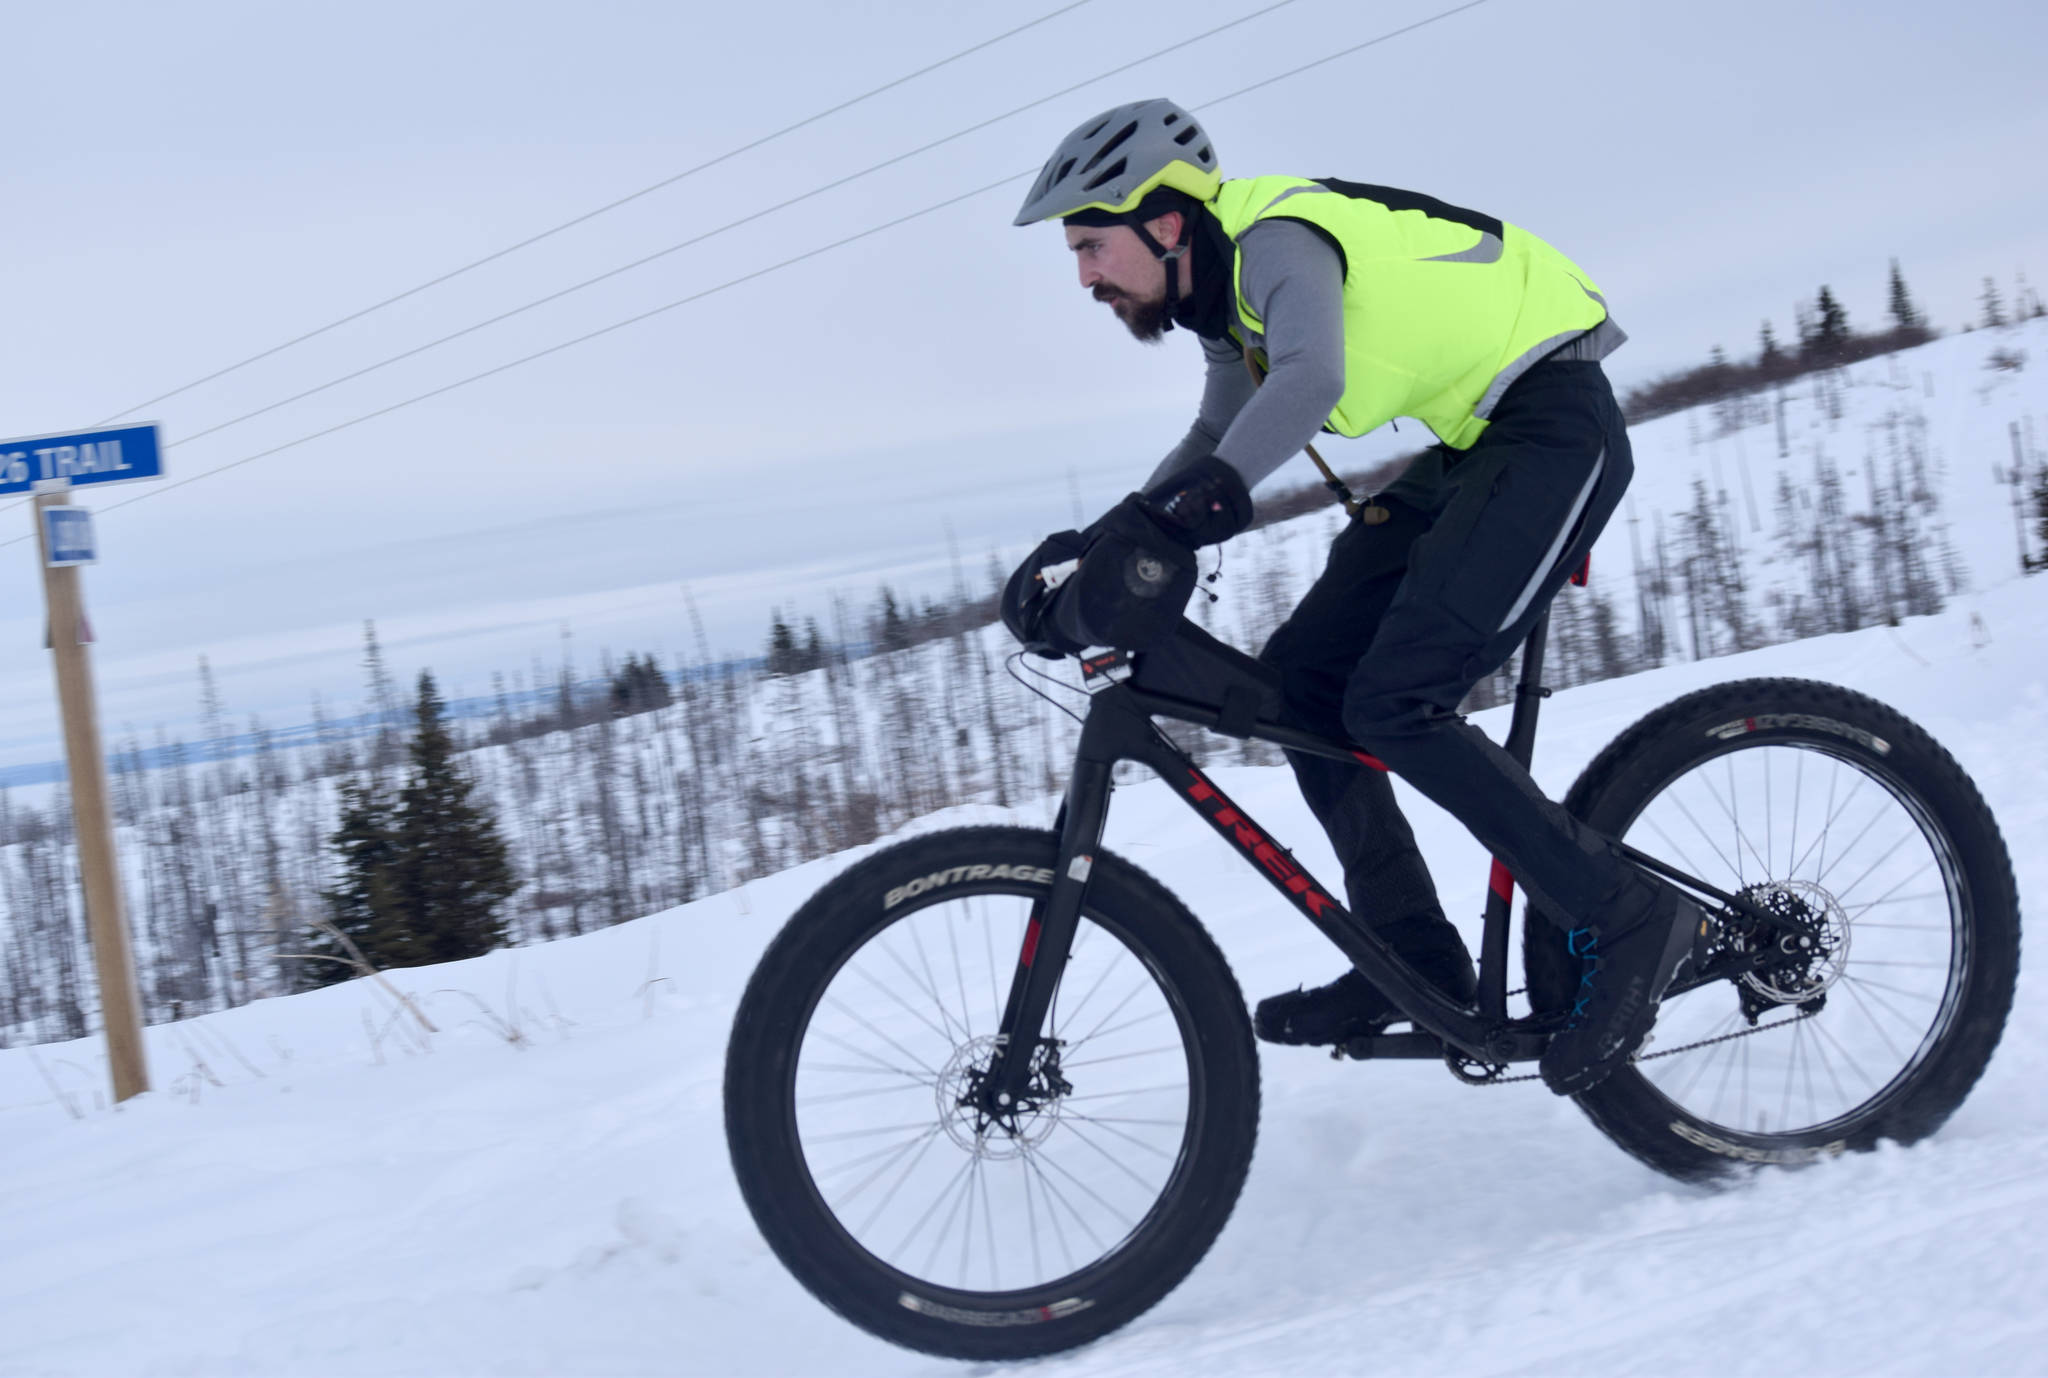 Nathan Kincaid flies down a hill during Fat Freddie’s Bike Race and Ramble on Feb. 9, 2019, in the Caribou Hills near Freddie’s Roadhouse. (Photo by Jeff Helminiak/Peninsula Clarion)